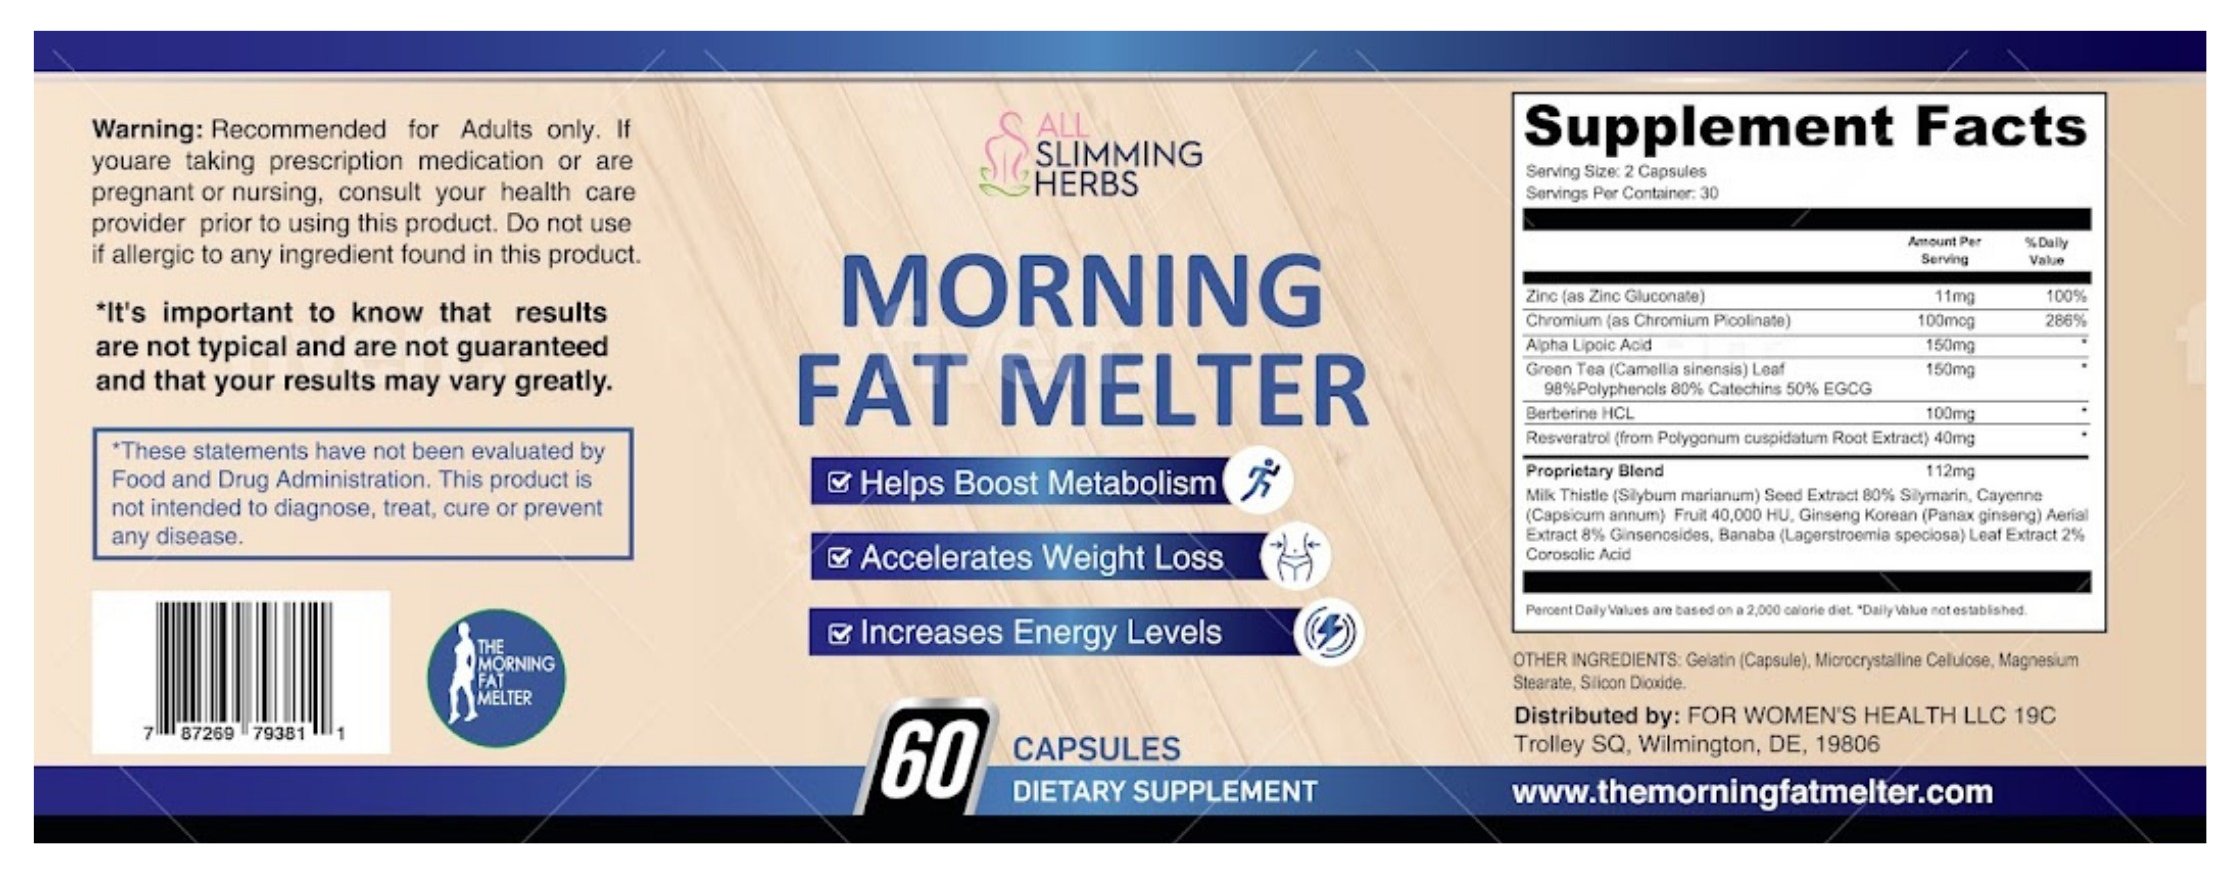 Morning Fat Melter weight loss supplement Facts